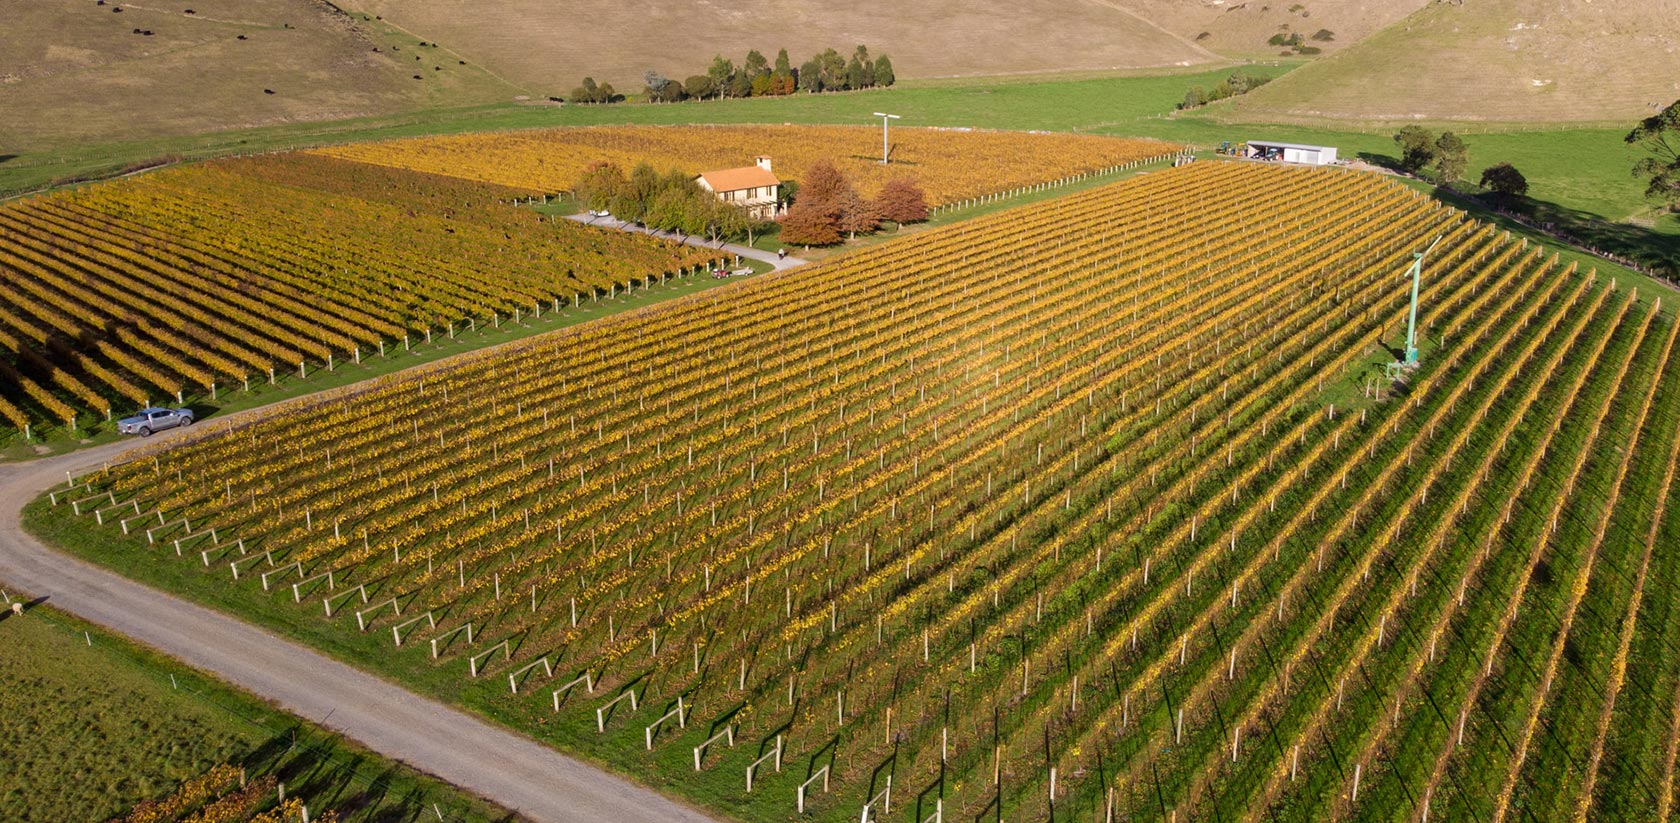 Alchemy Wines Vineyard from Above